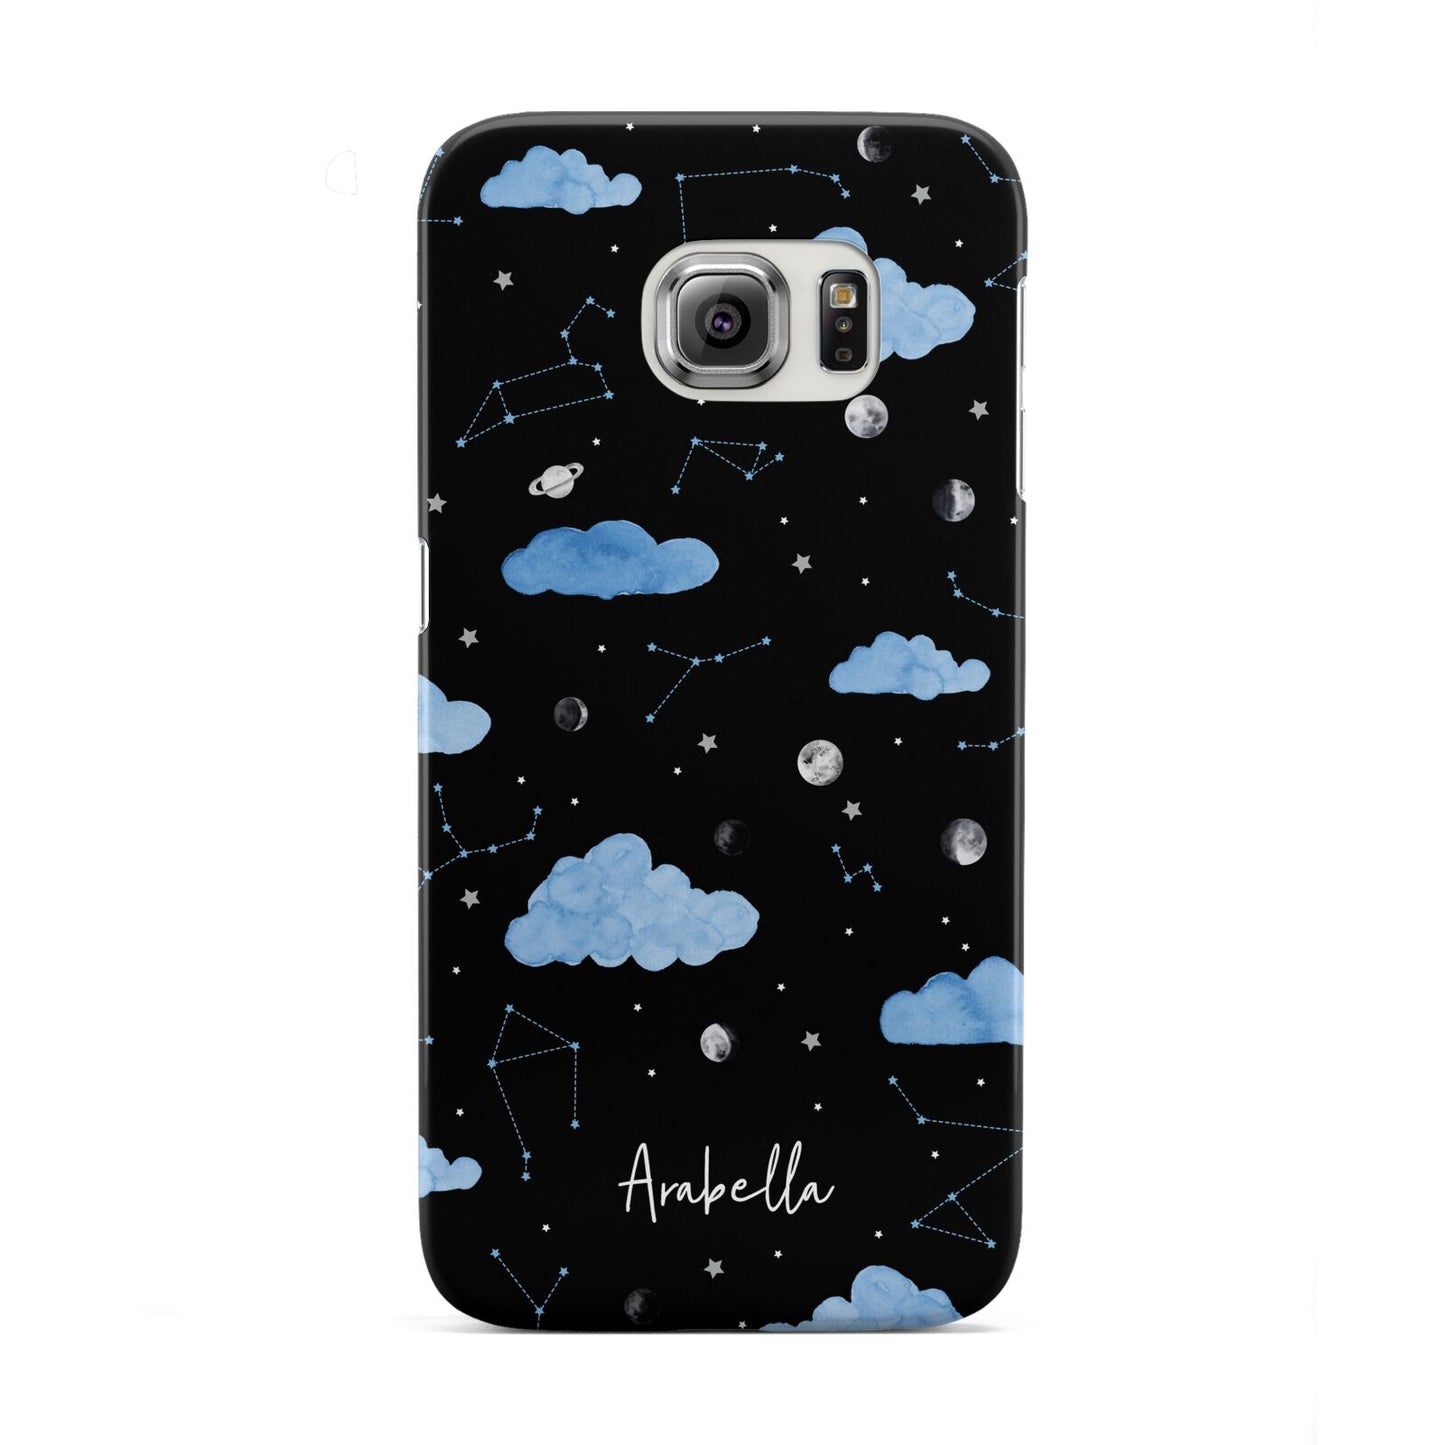 Cloudy Night Sky with Name Samsung Galaxy S6 Edge Case